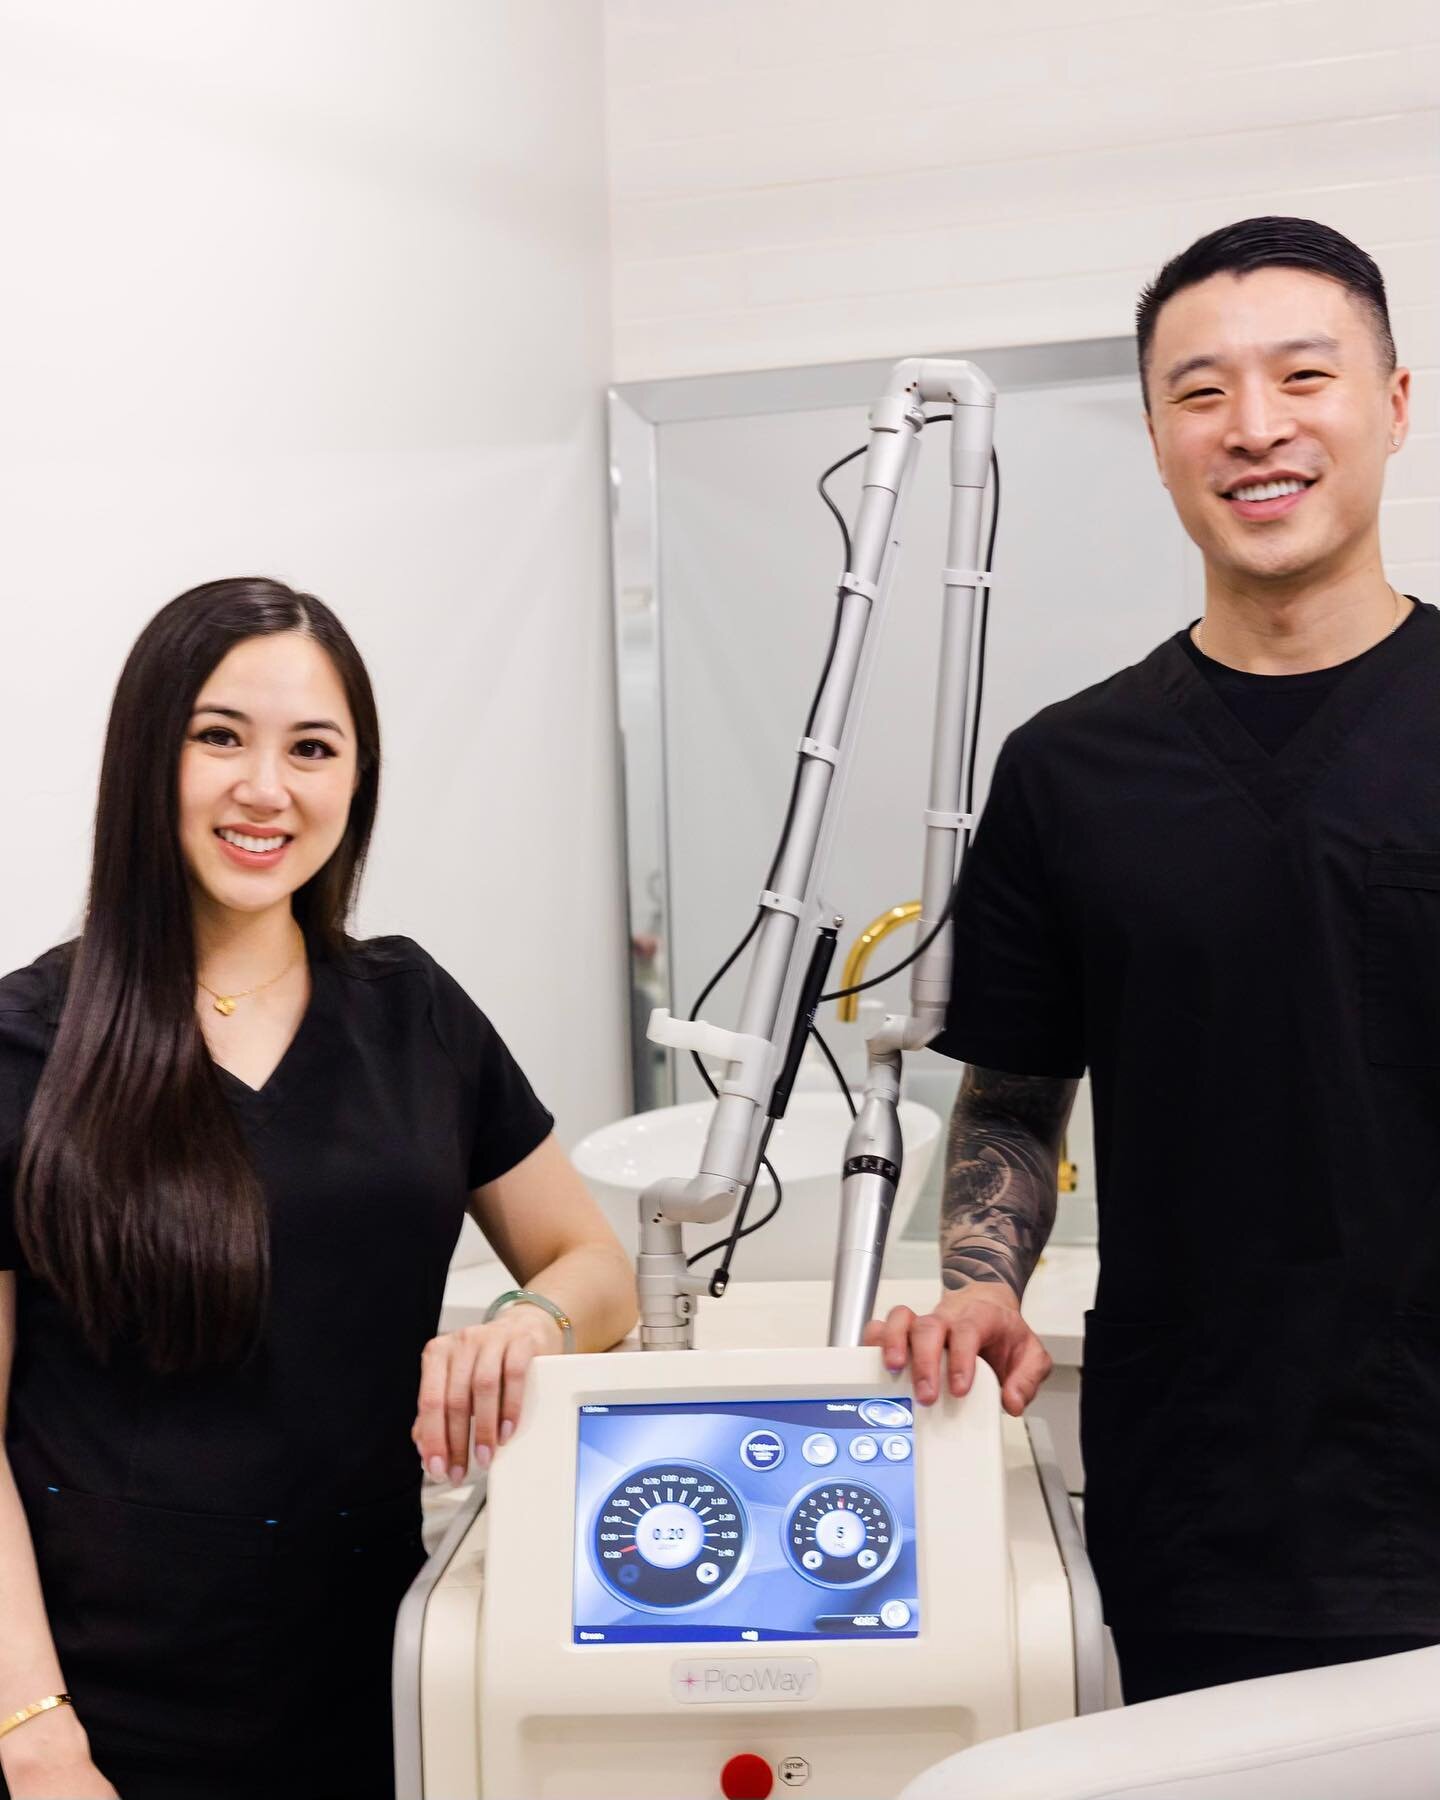 Meet the faces behind Reversal!

It&rsquo;s been a long time since we&rsquo;ve introduced ourselves!

May and Alex are Laser Technicians at Reversal Laser Studio. Our goal is to help give our clients a clean slate and make them feel confident in thei